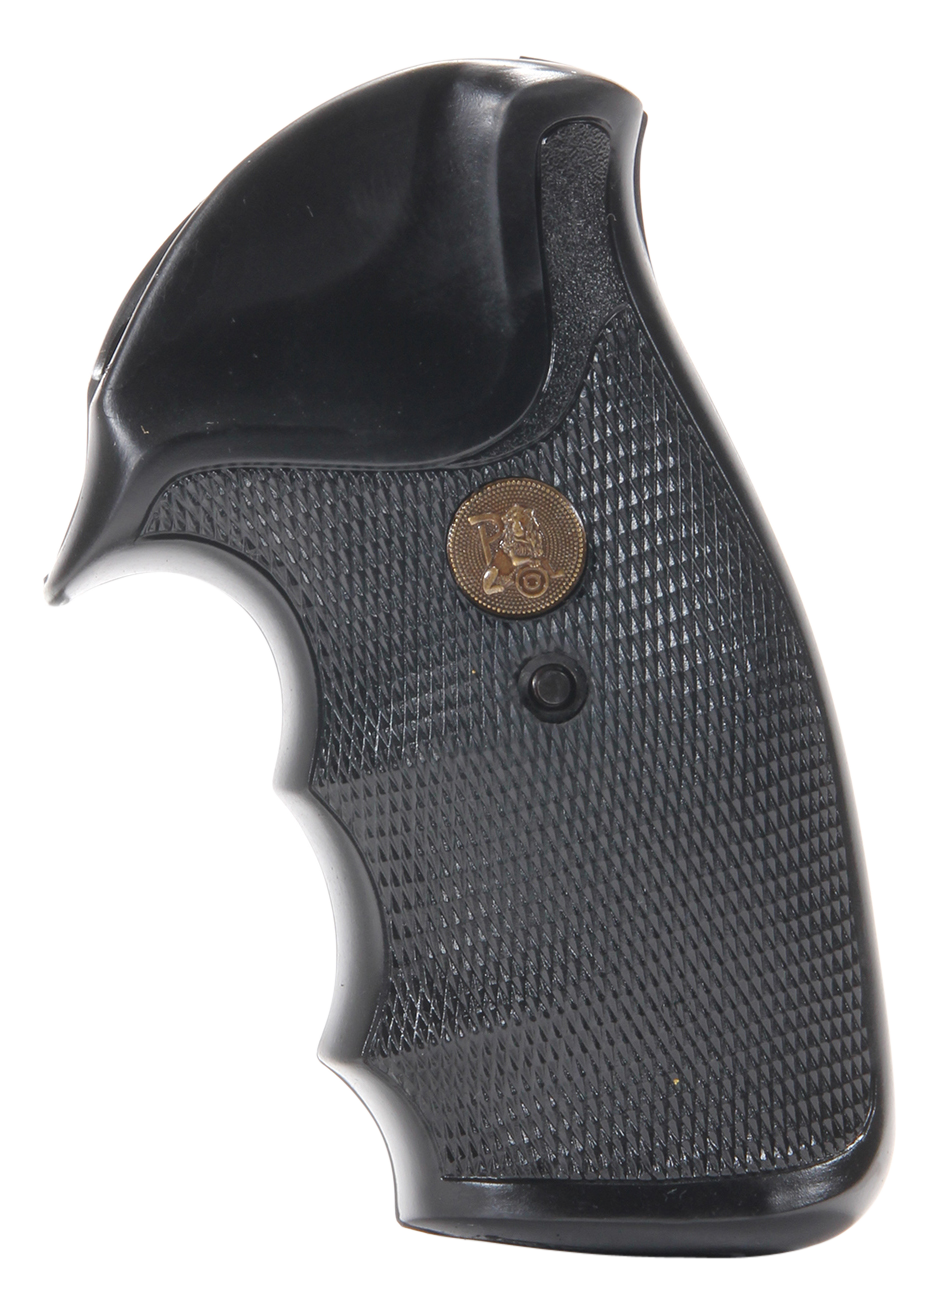 Pachmayr Gripper Grip For - Charter Arms Revolvers